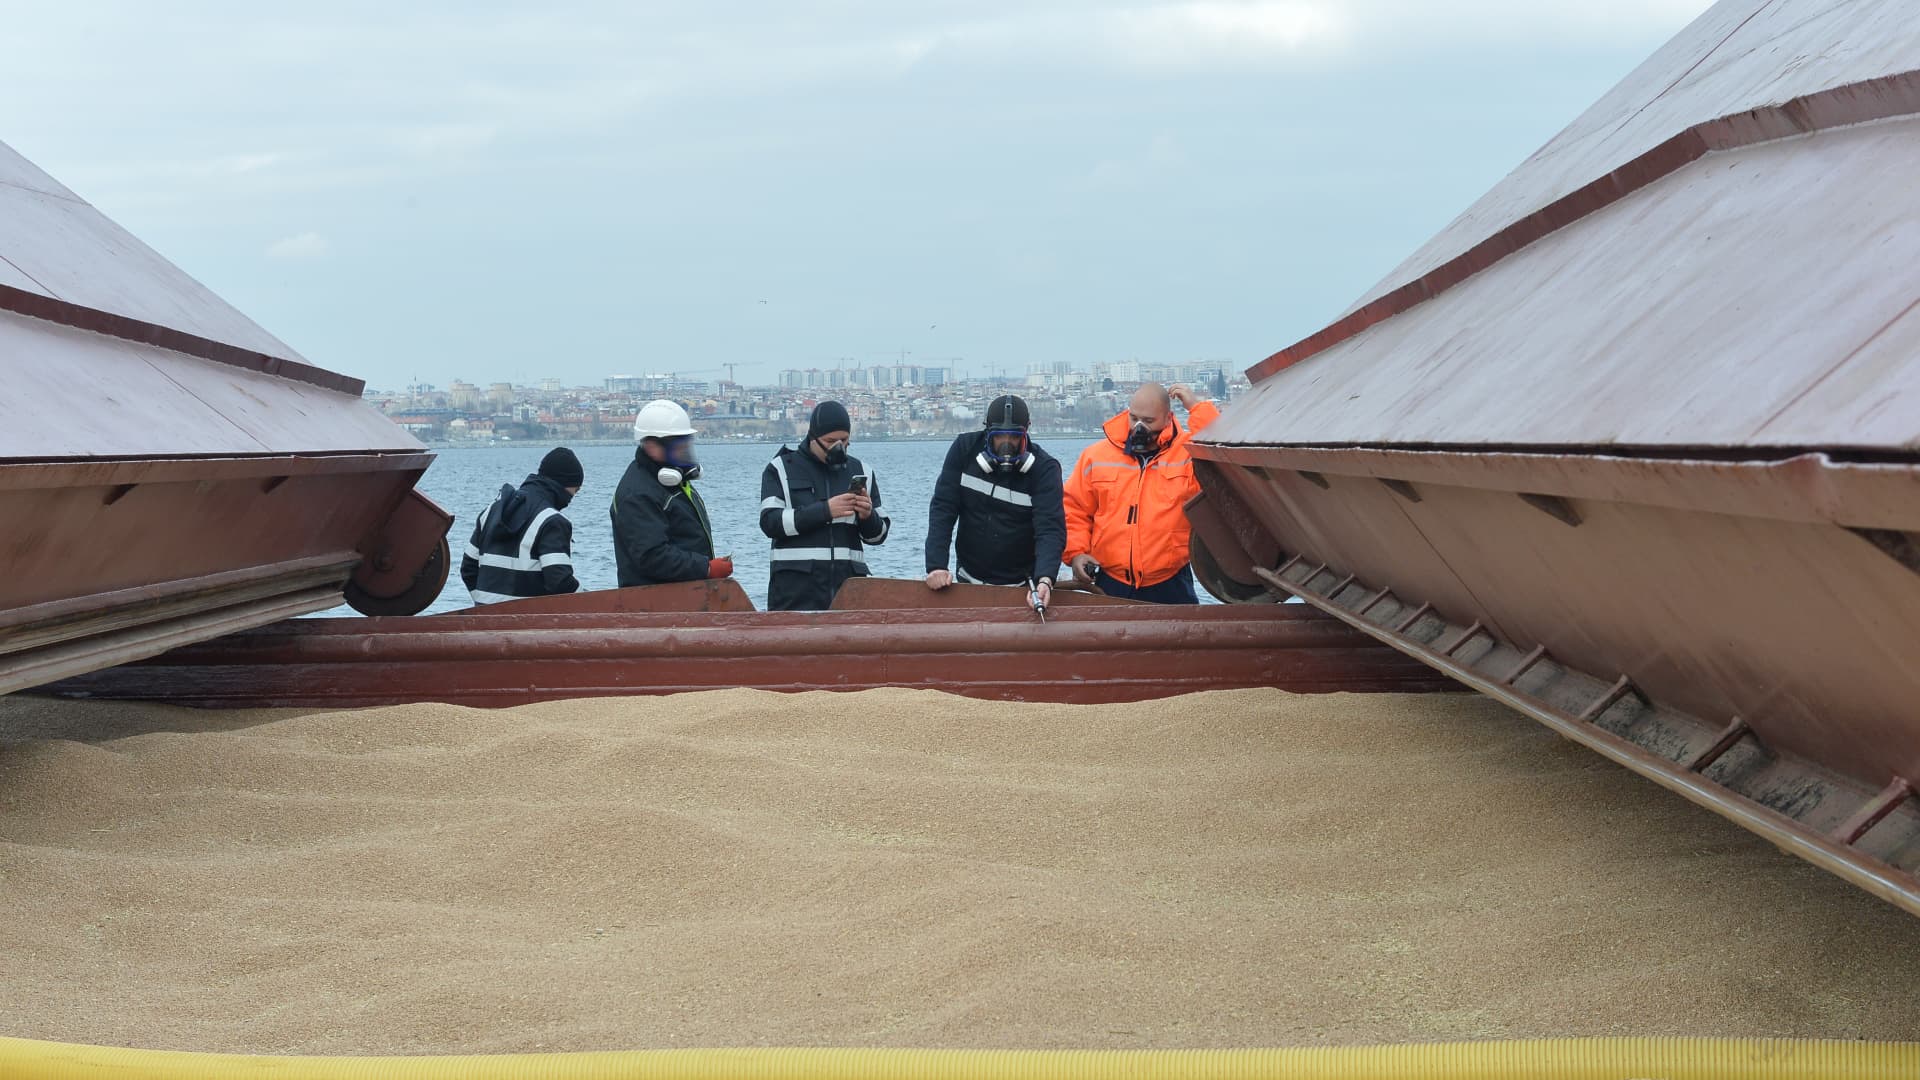 A team inspects the produce in the ship carrying wheat from Ukraine to Afghanistan after inspection in the open sea around Zeytinburnu district of Istanbul, Turkiye on January 24, 2023.